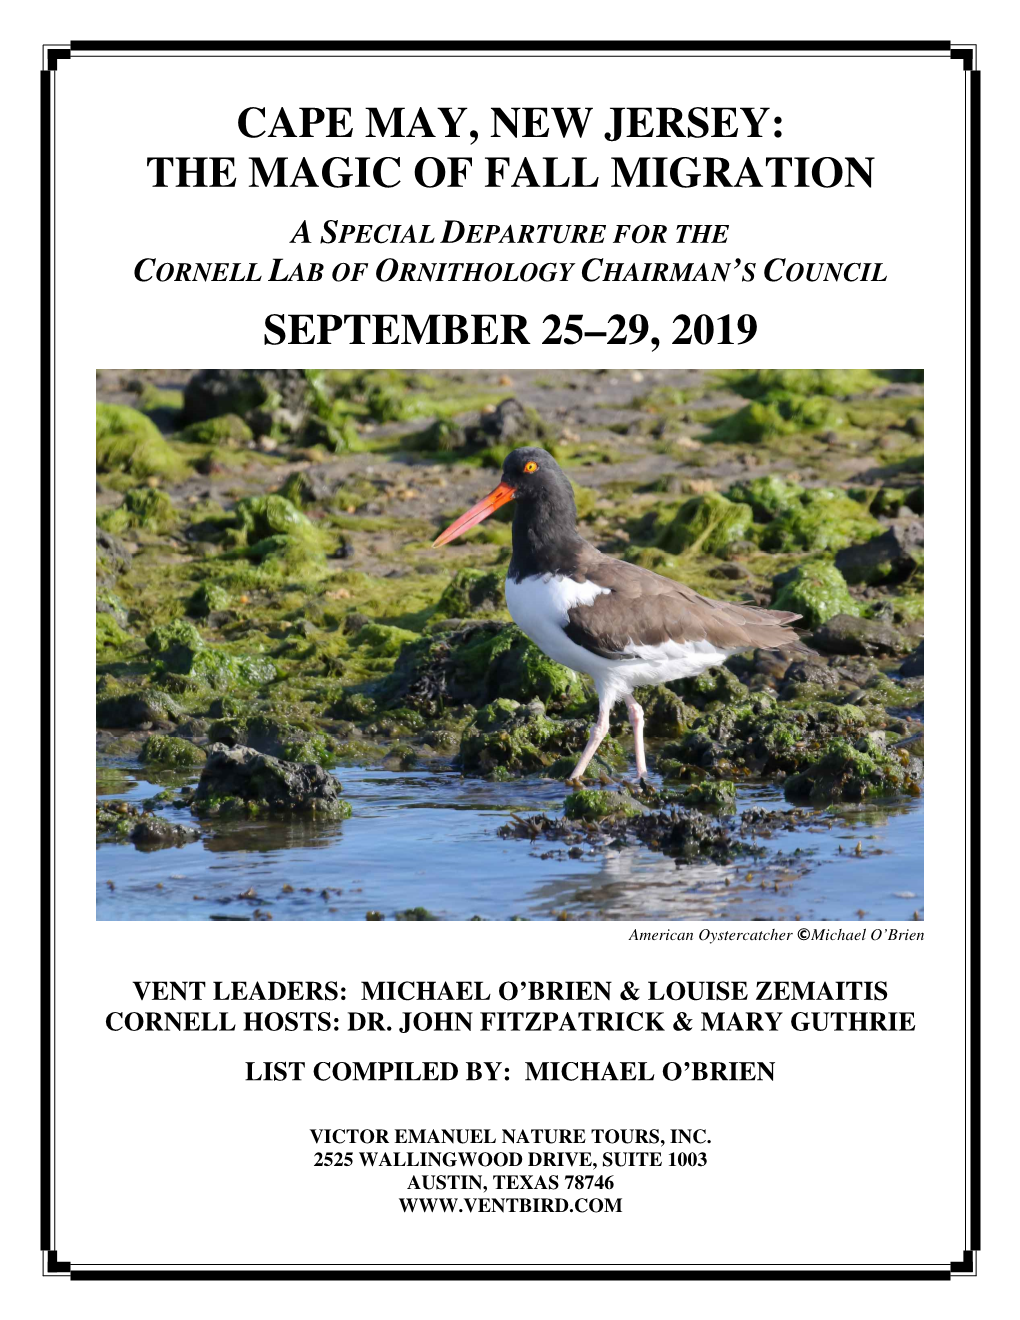 Cape May, New Jersey: the Magic of Fall Migration